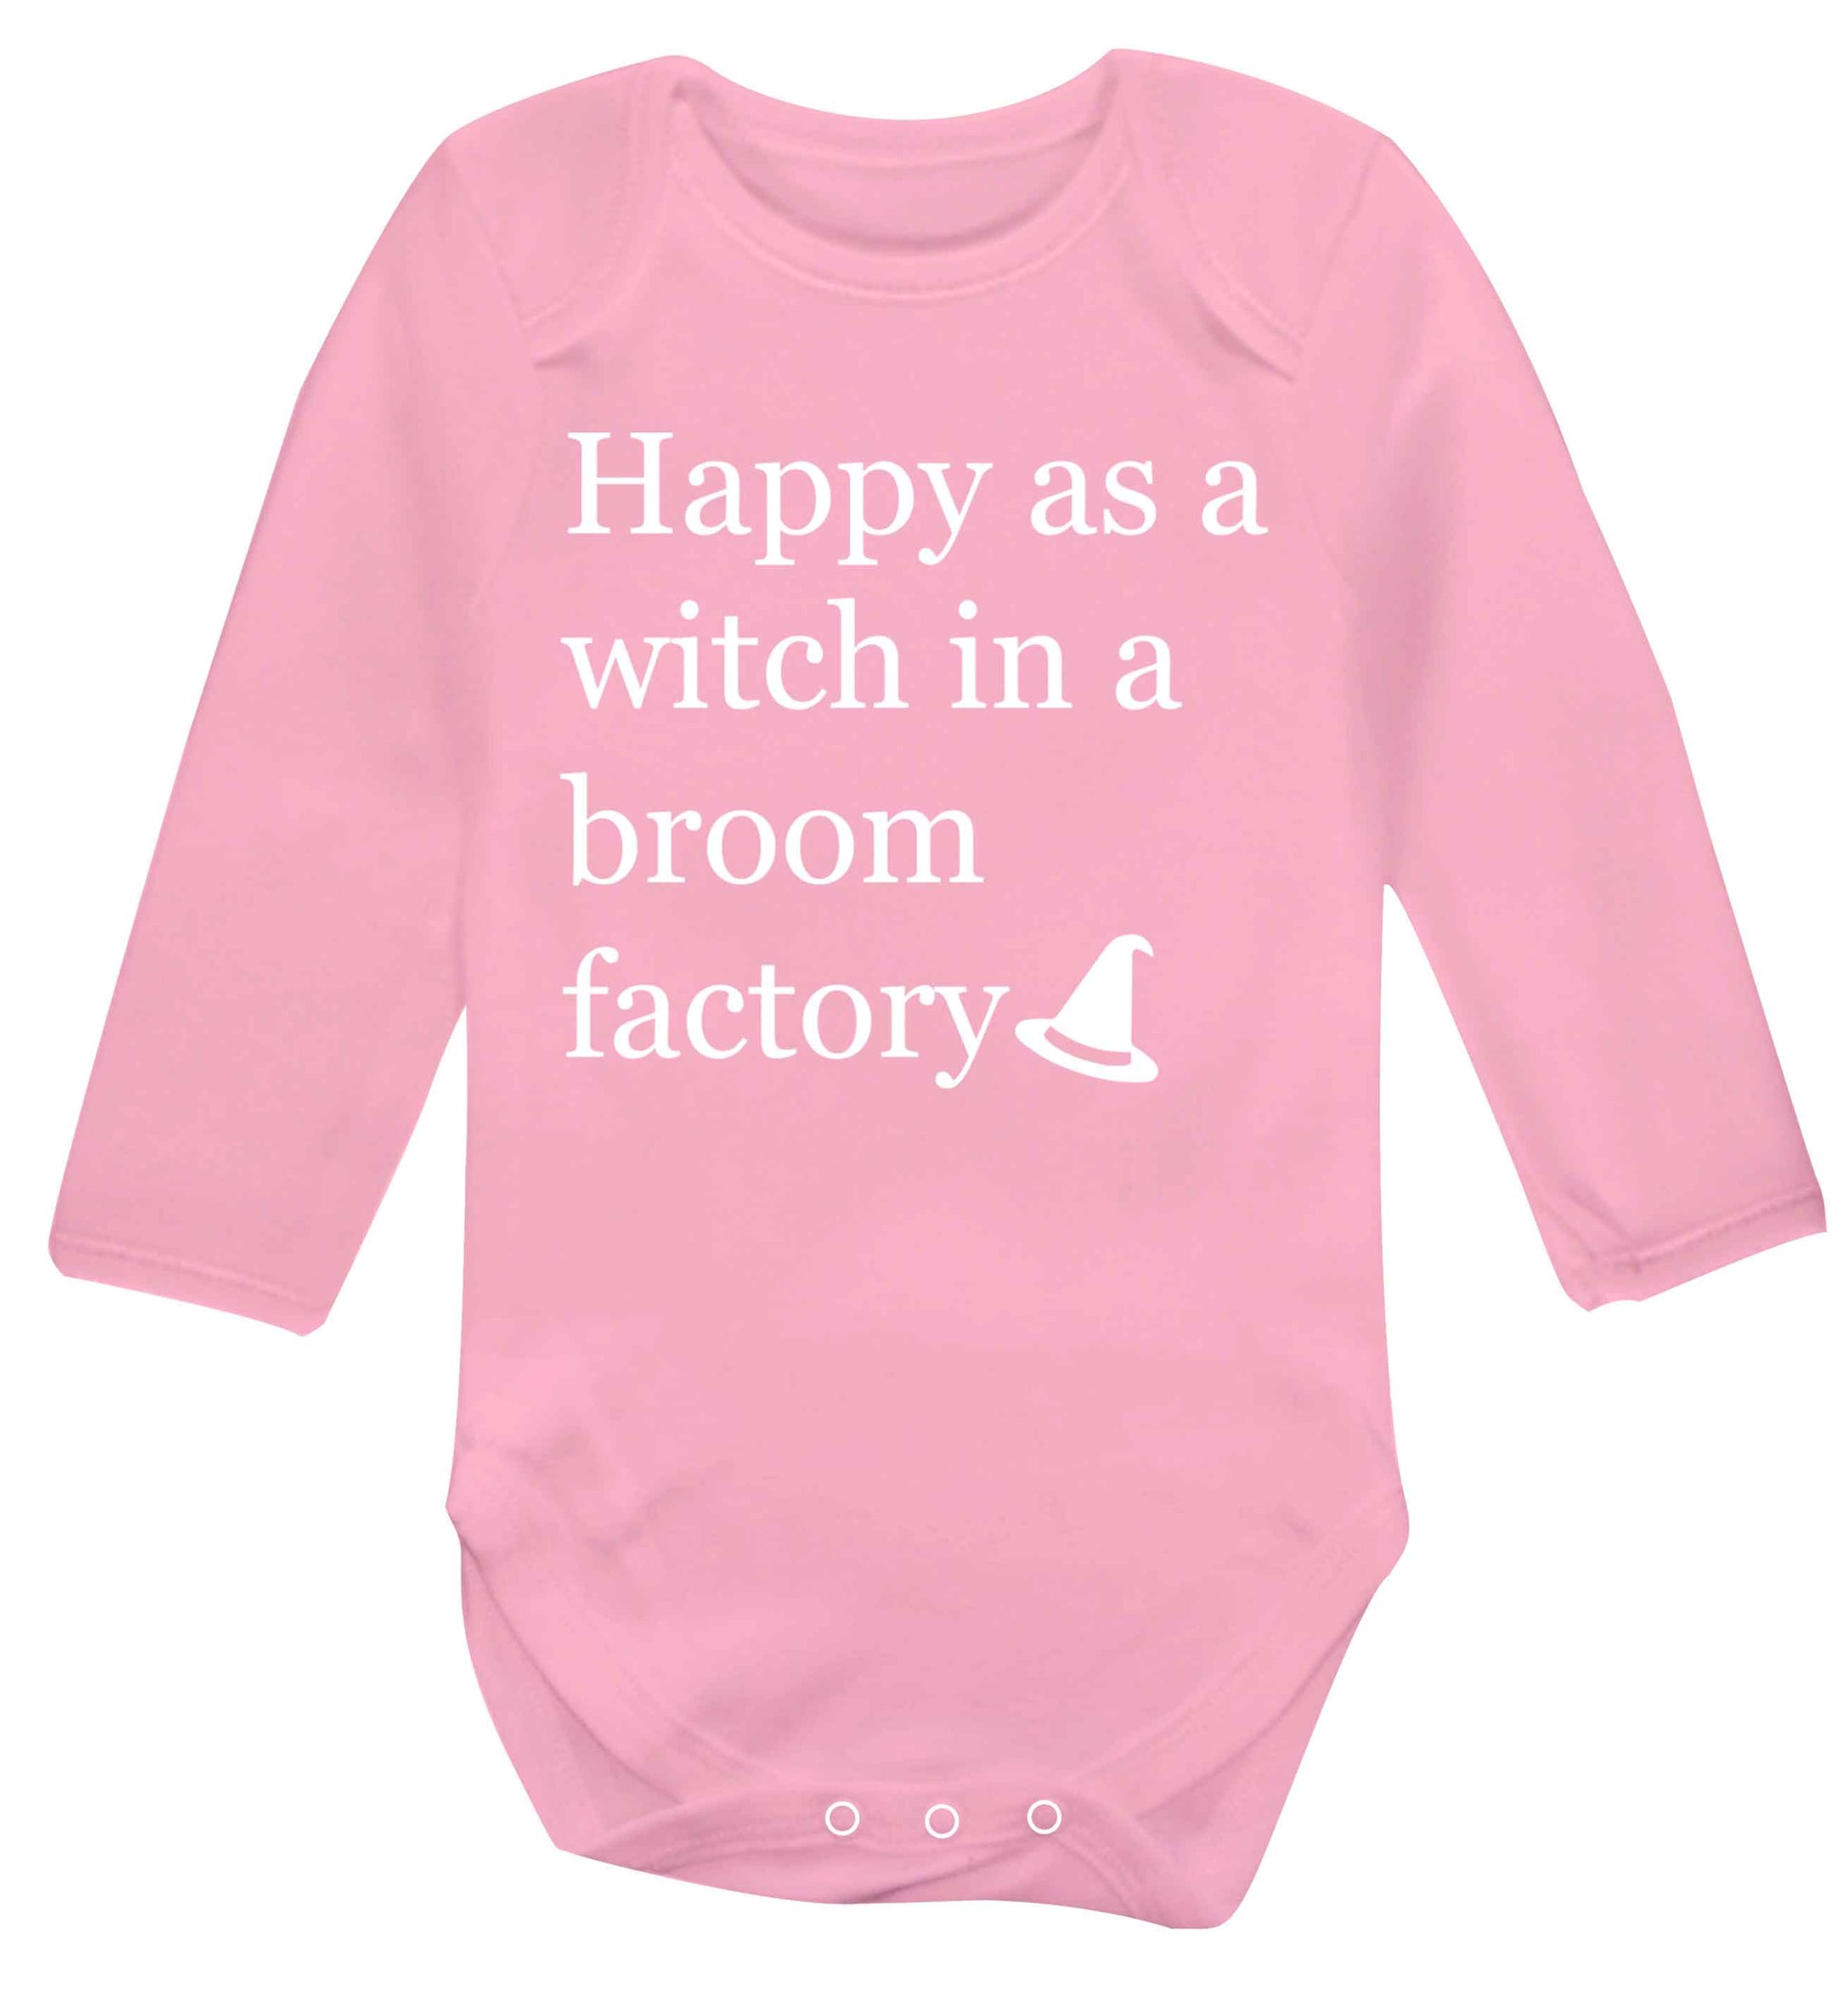 Happy as a witch in a broom factory Baby Vest long sleeved pale pink 6-12 months